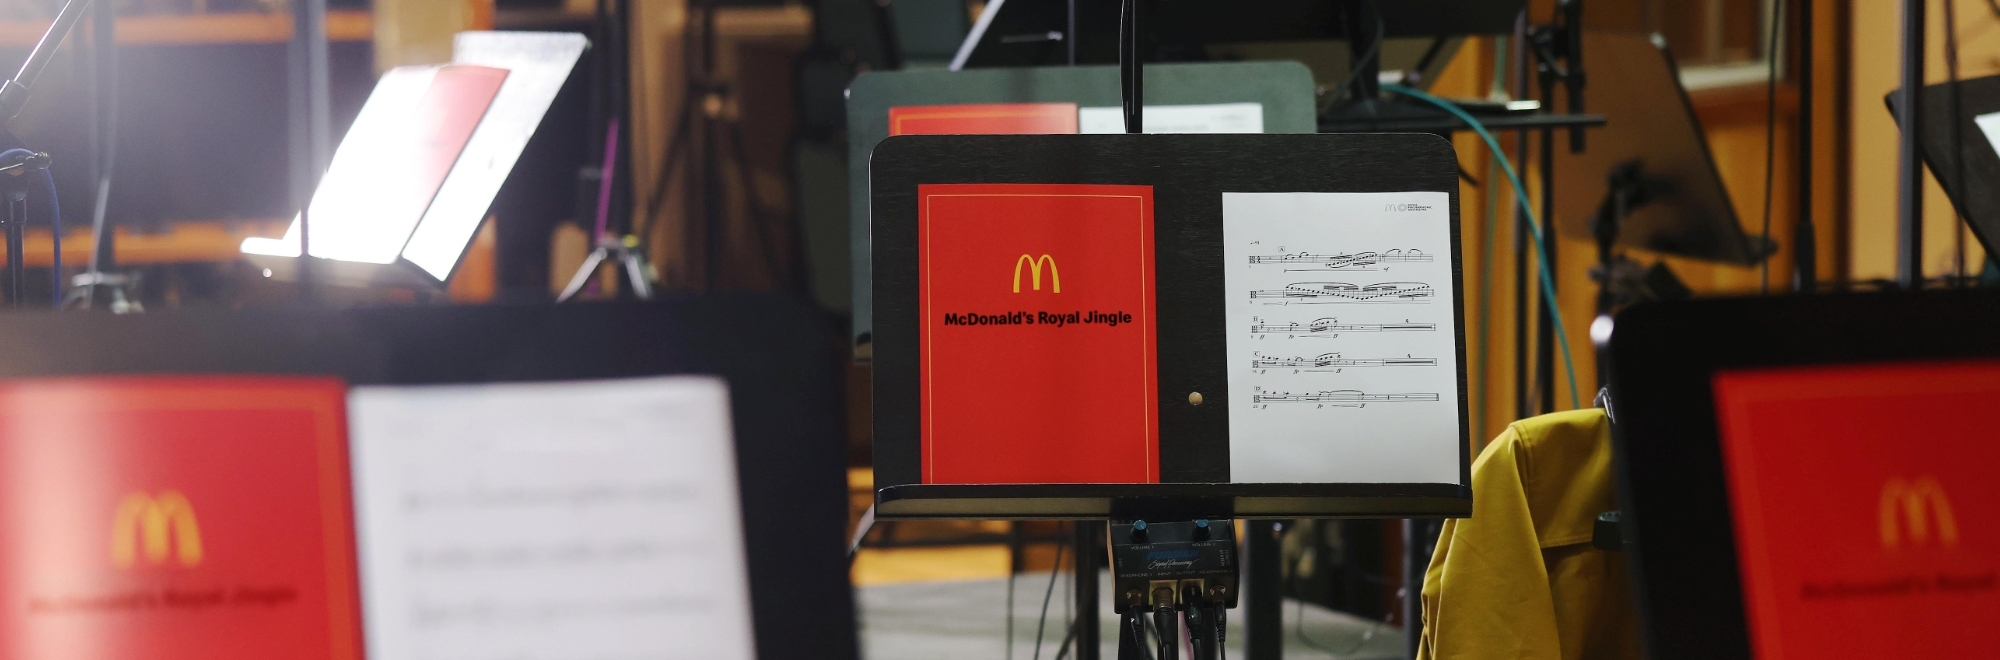 One’s Lovin’ It: McDonald’s creates new jingle to commemorate the once-in-a-generation coronation of King Charles III